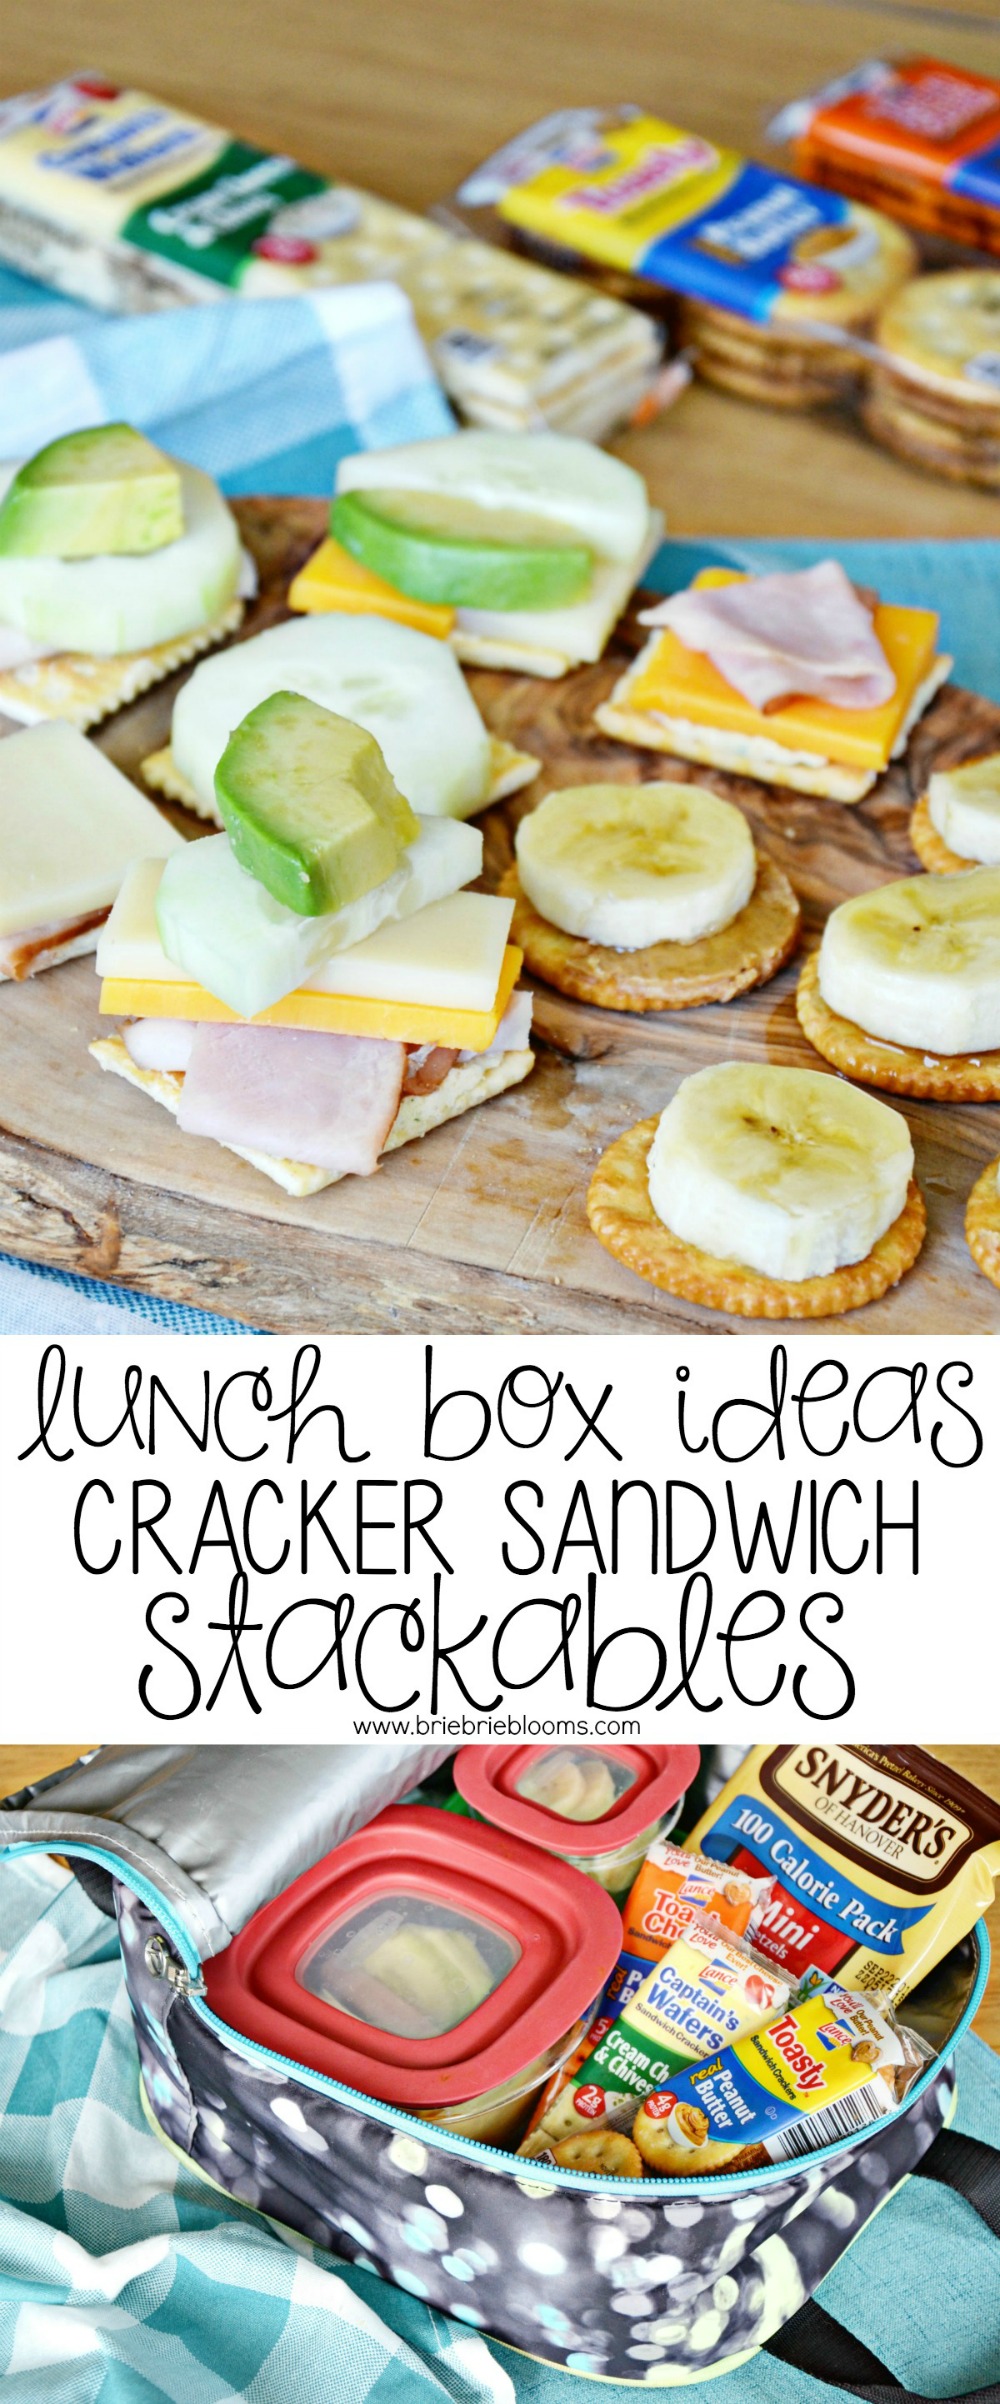 These easy lunch box ideas with cracker sandwich stackables are fun to pack and can be different every time.